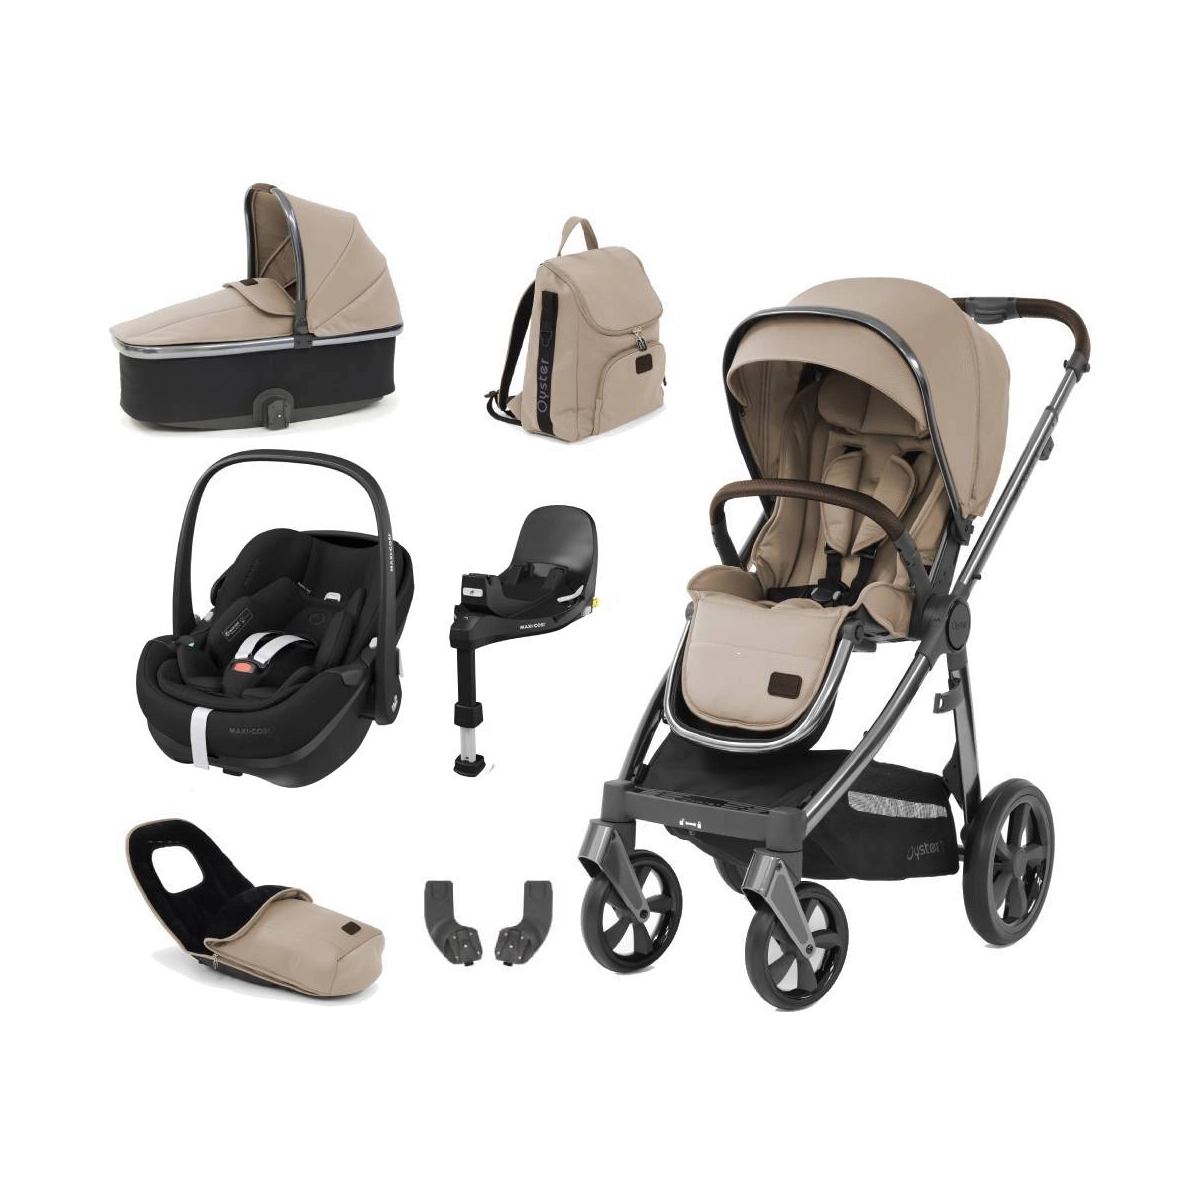 BabyStyle Oyster 3 Gun Metal Chassis Luxury 7 Piece Bundle with Maxi Cosi Pebble 360 Car Seat & Base